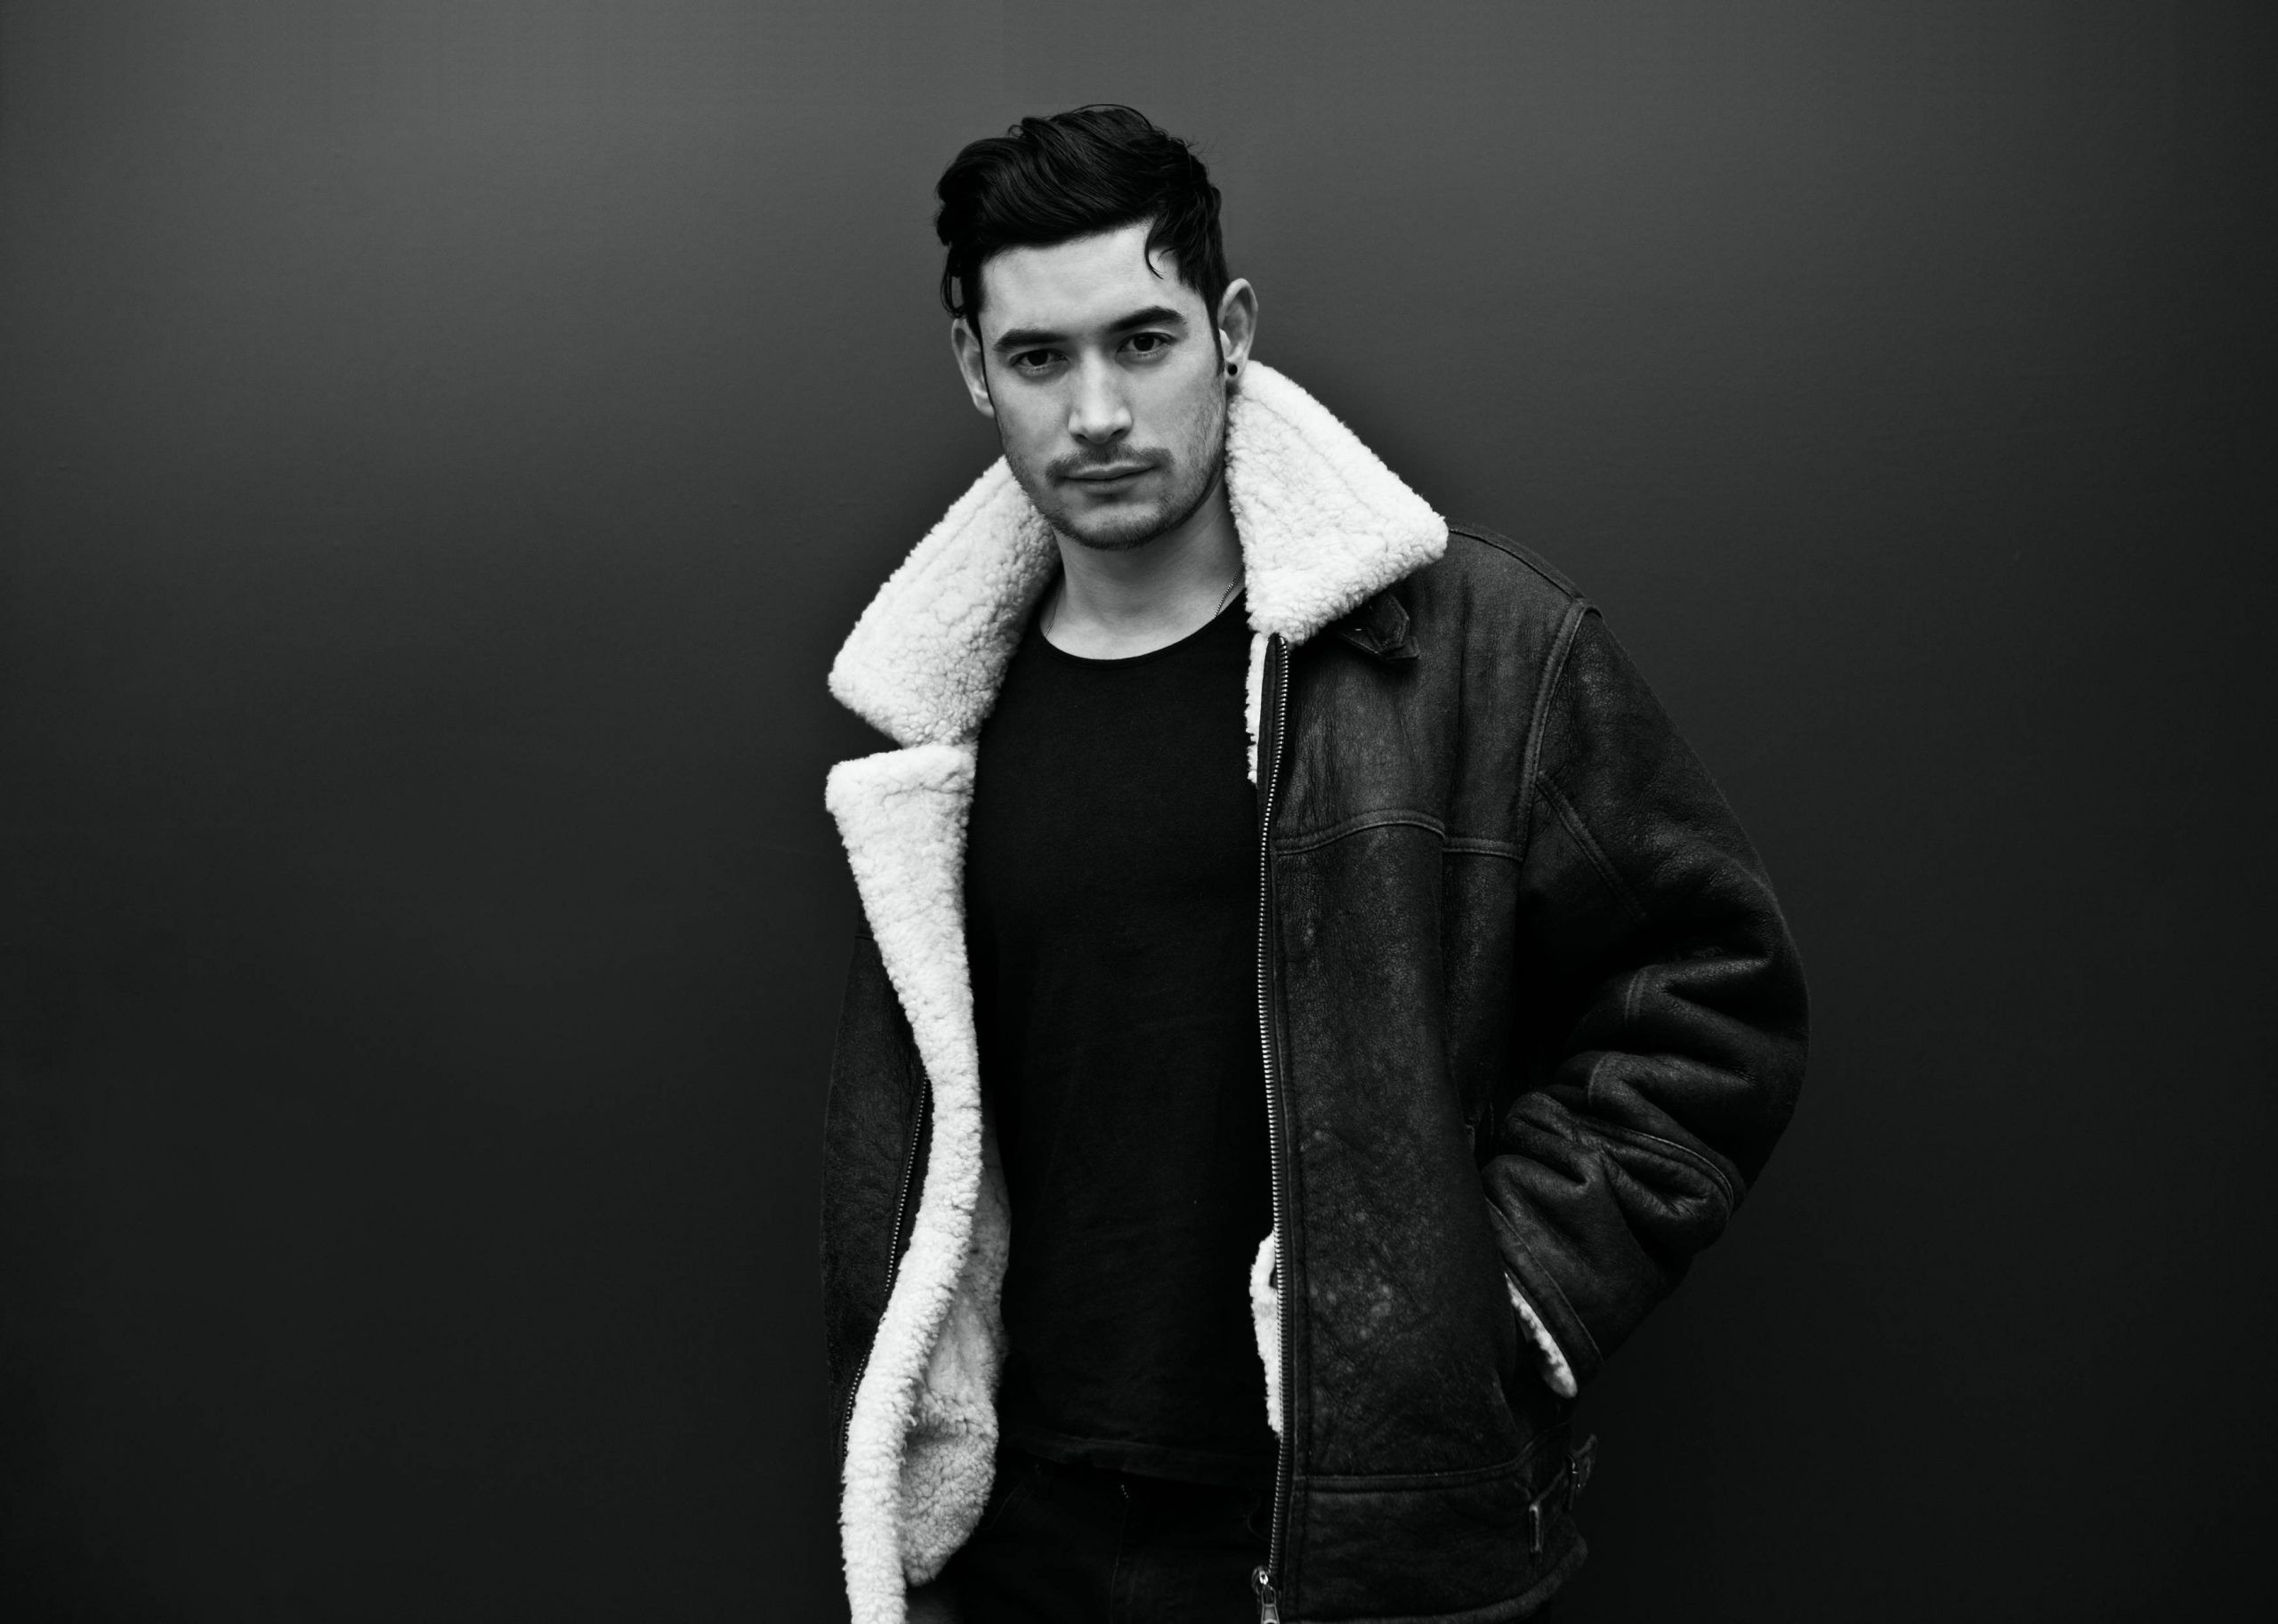 Dax J'set at Tunisian Festival triggered outrage from the audience ...